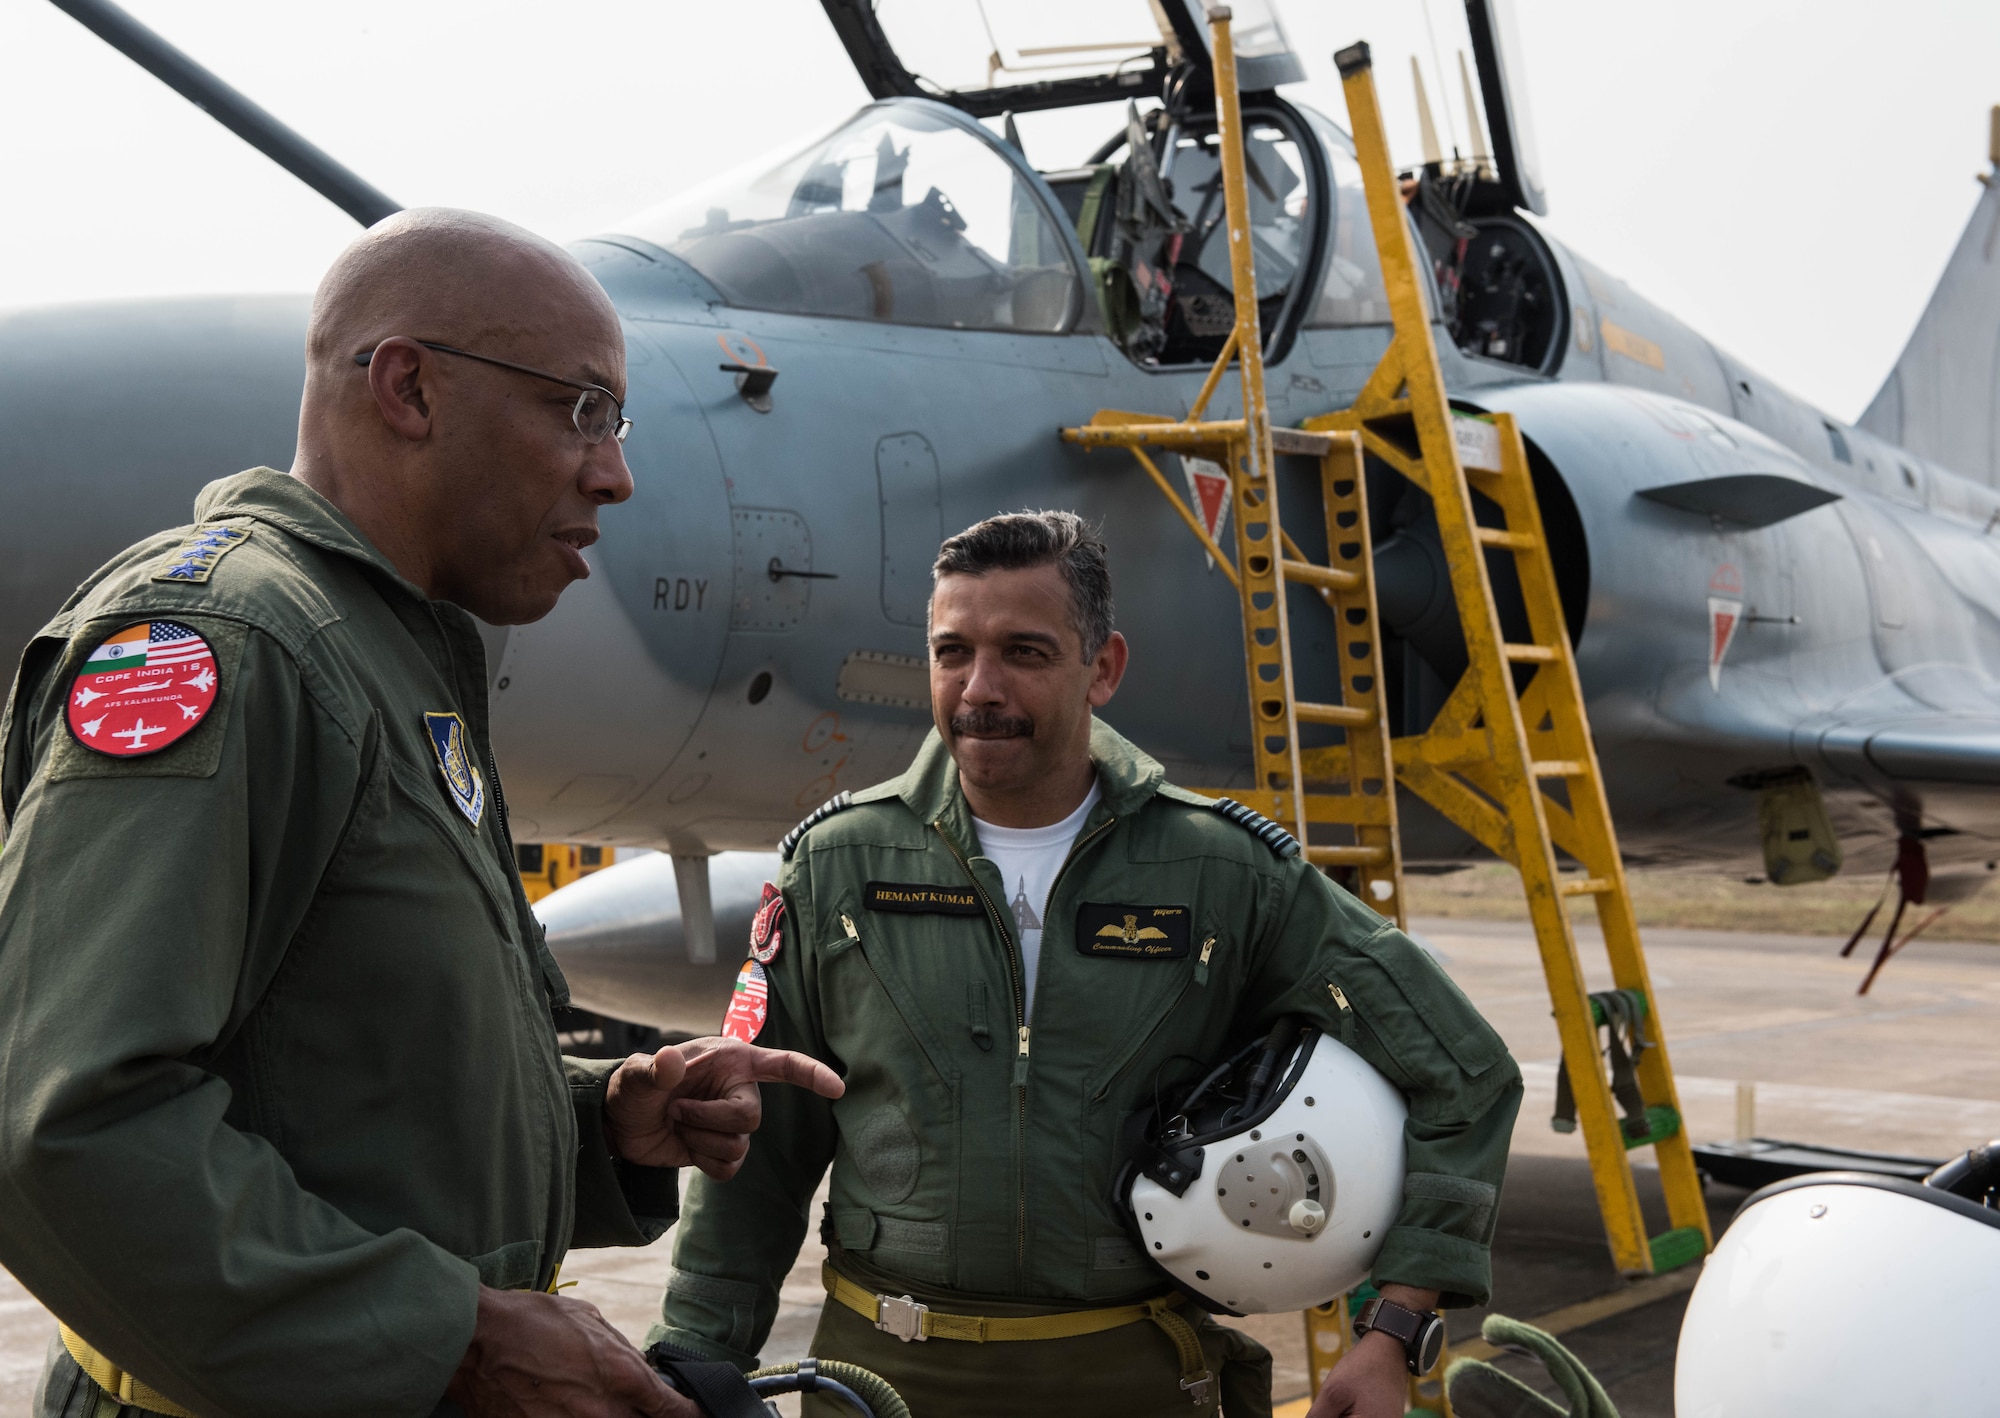 U.S. Air Force Gen. CQ Brown, Jr., Pacific Air Forces commander, discusses his orientation flight in an Indian Air Force Mirage 2000 at Cope India 19 at Kalaikunda Air Force Station, India, Dec. 14, 2018.